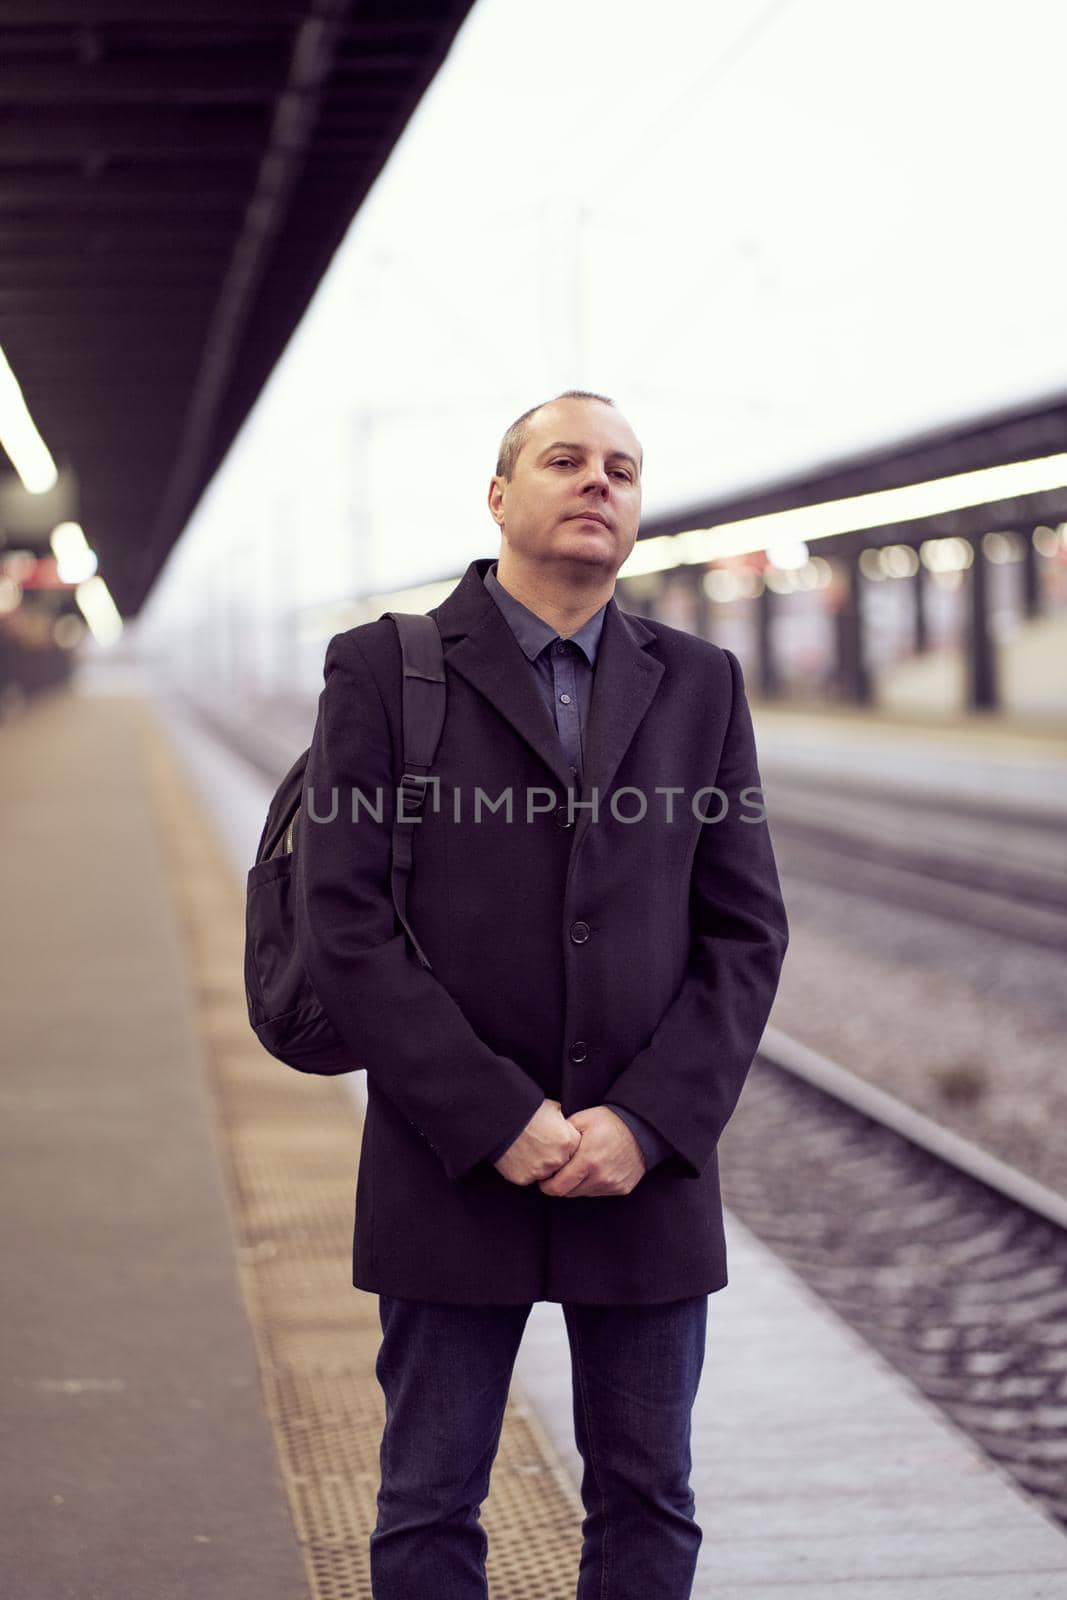 Train Station. A mature man in business clothes and a coat is standing and waiting for a train. Caucasian man looks into distance, winter or autumn. Dark evening. Vertical